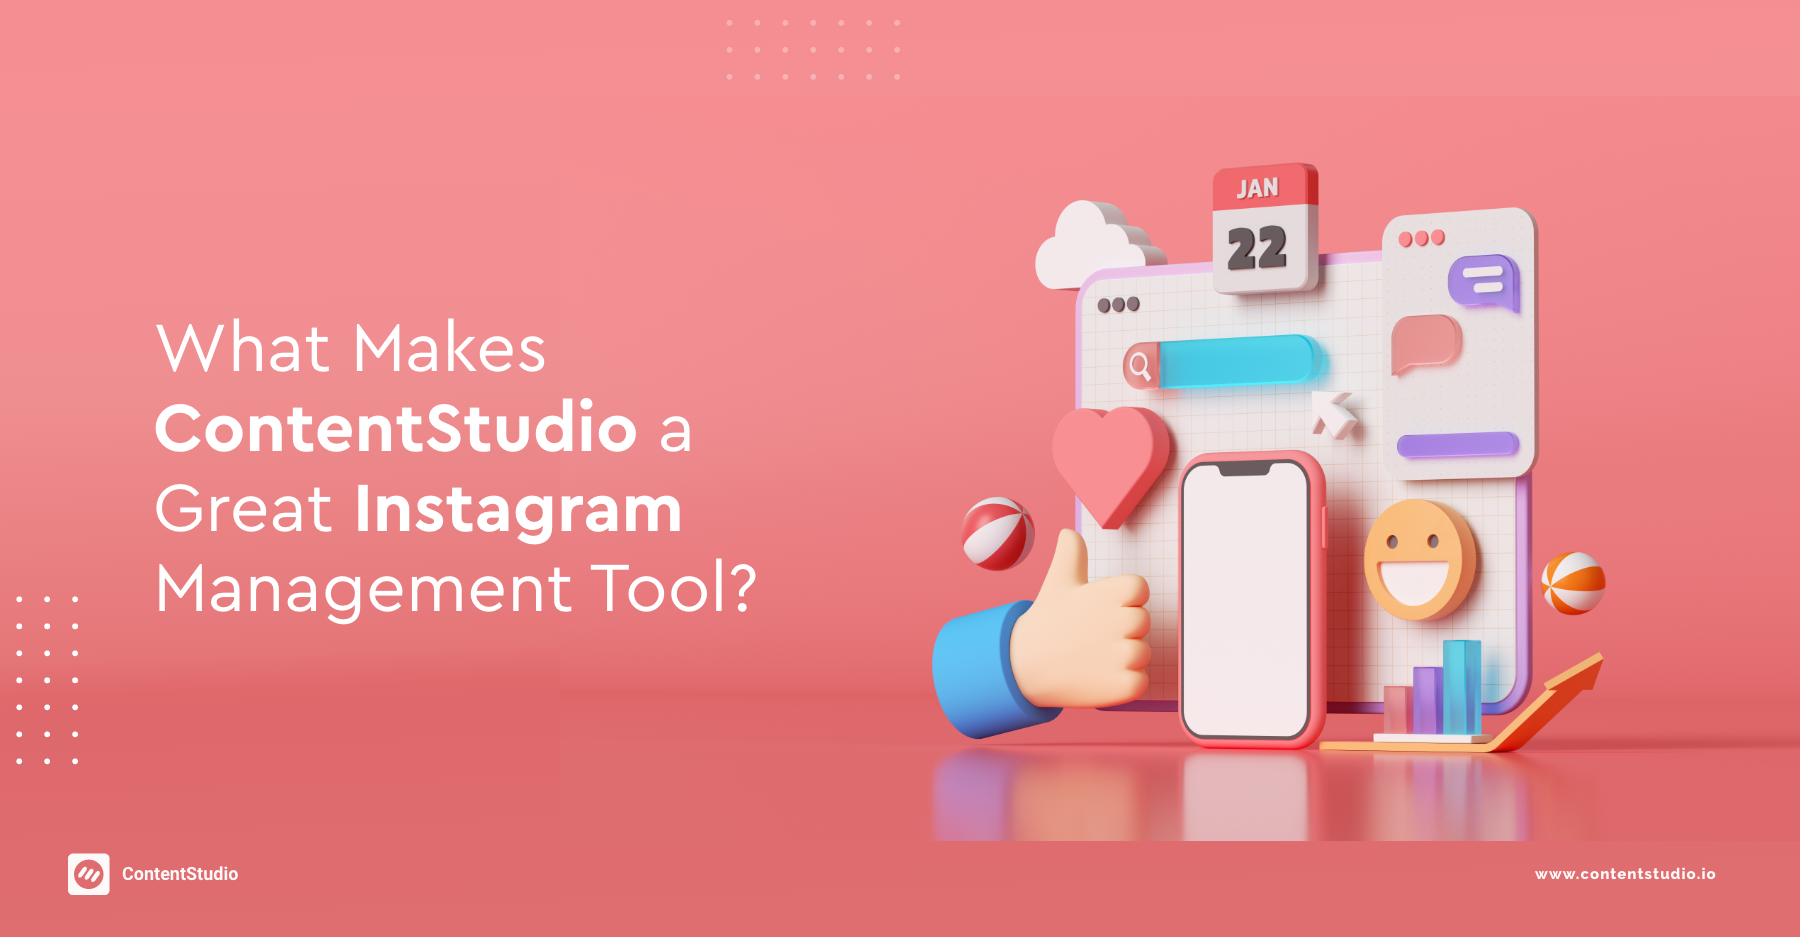 What Makes ContentStudio a Great Instagram Management Tool?